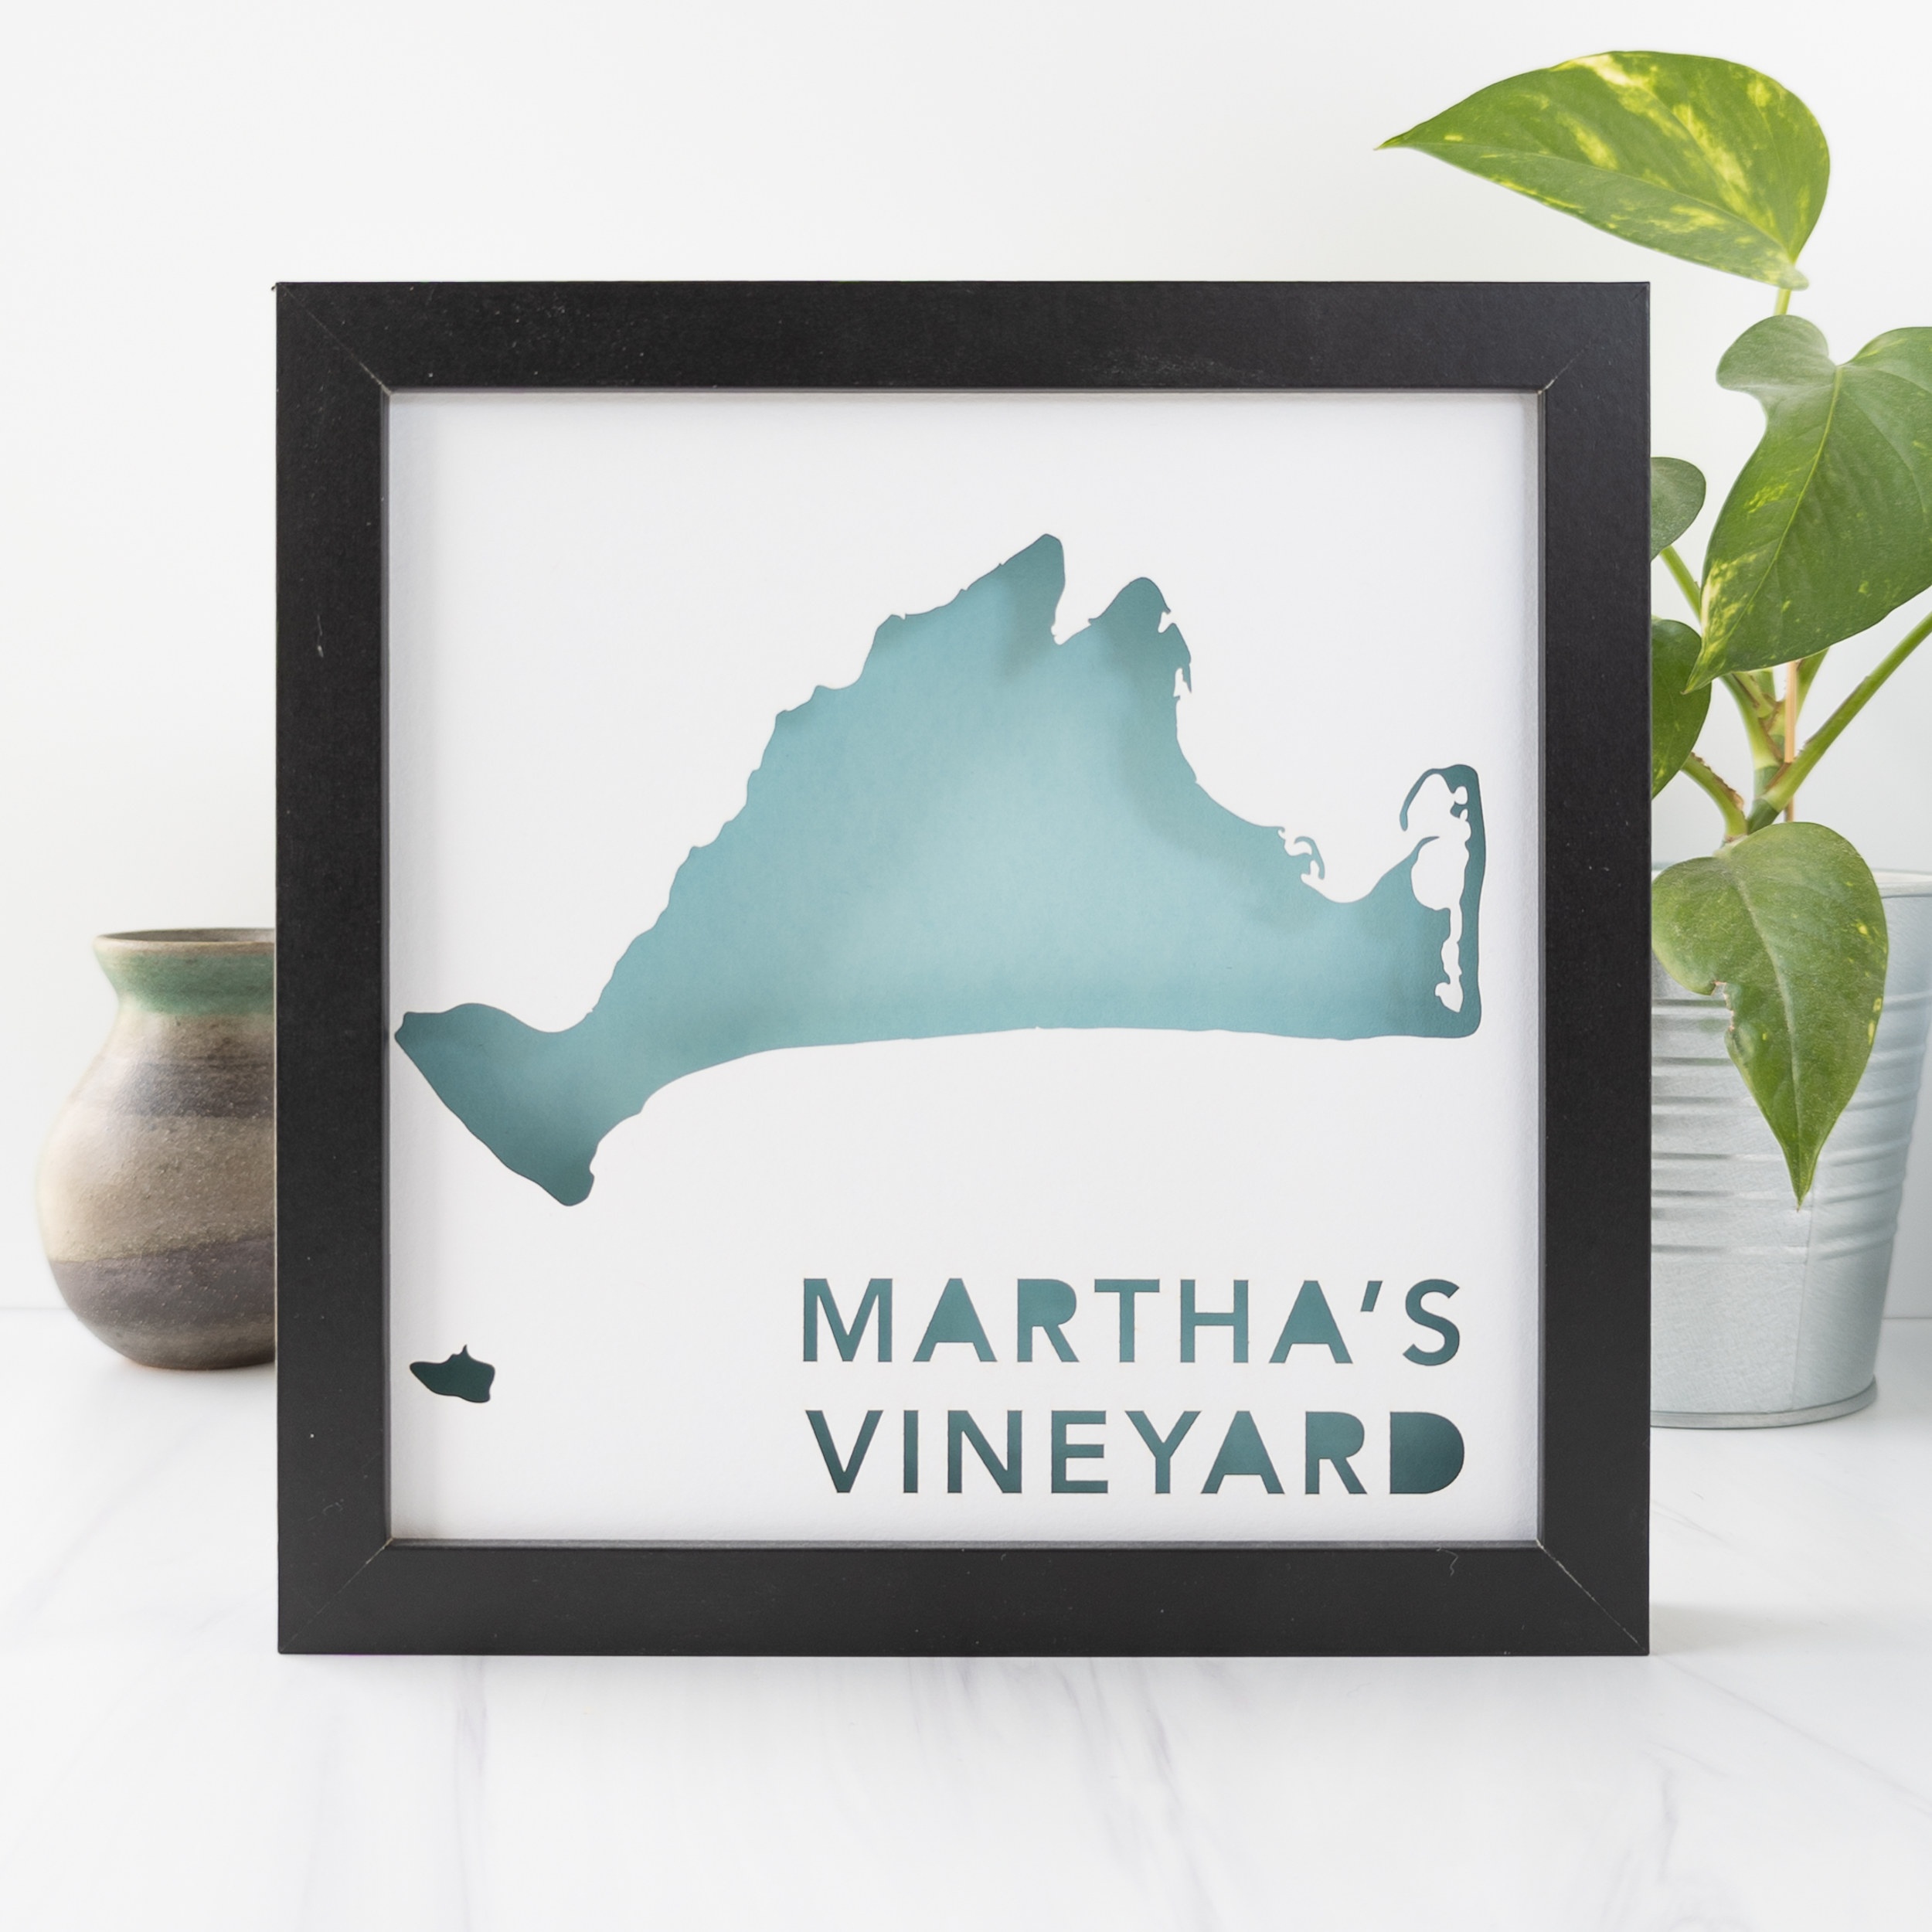 a black frame with a blue cut-out map of Martha's Vineyard